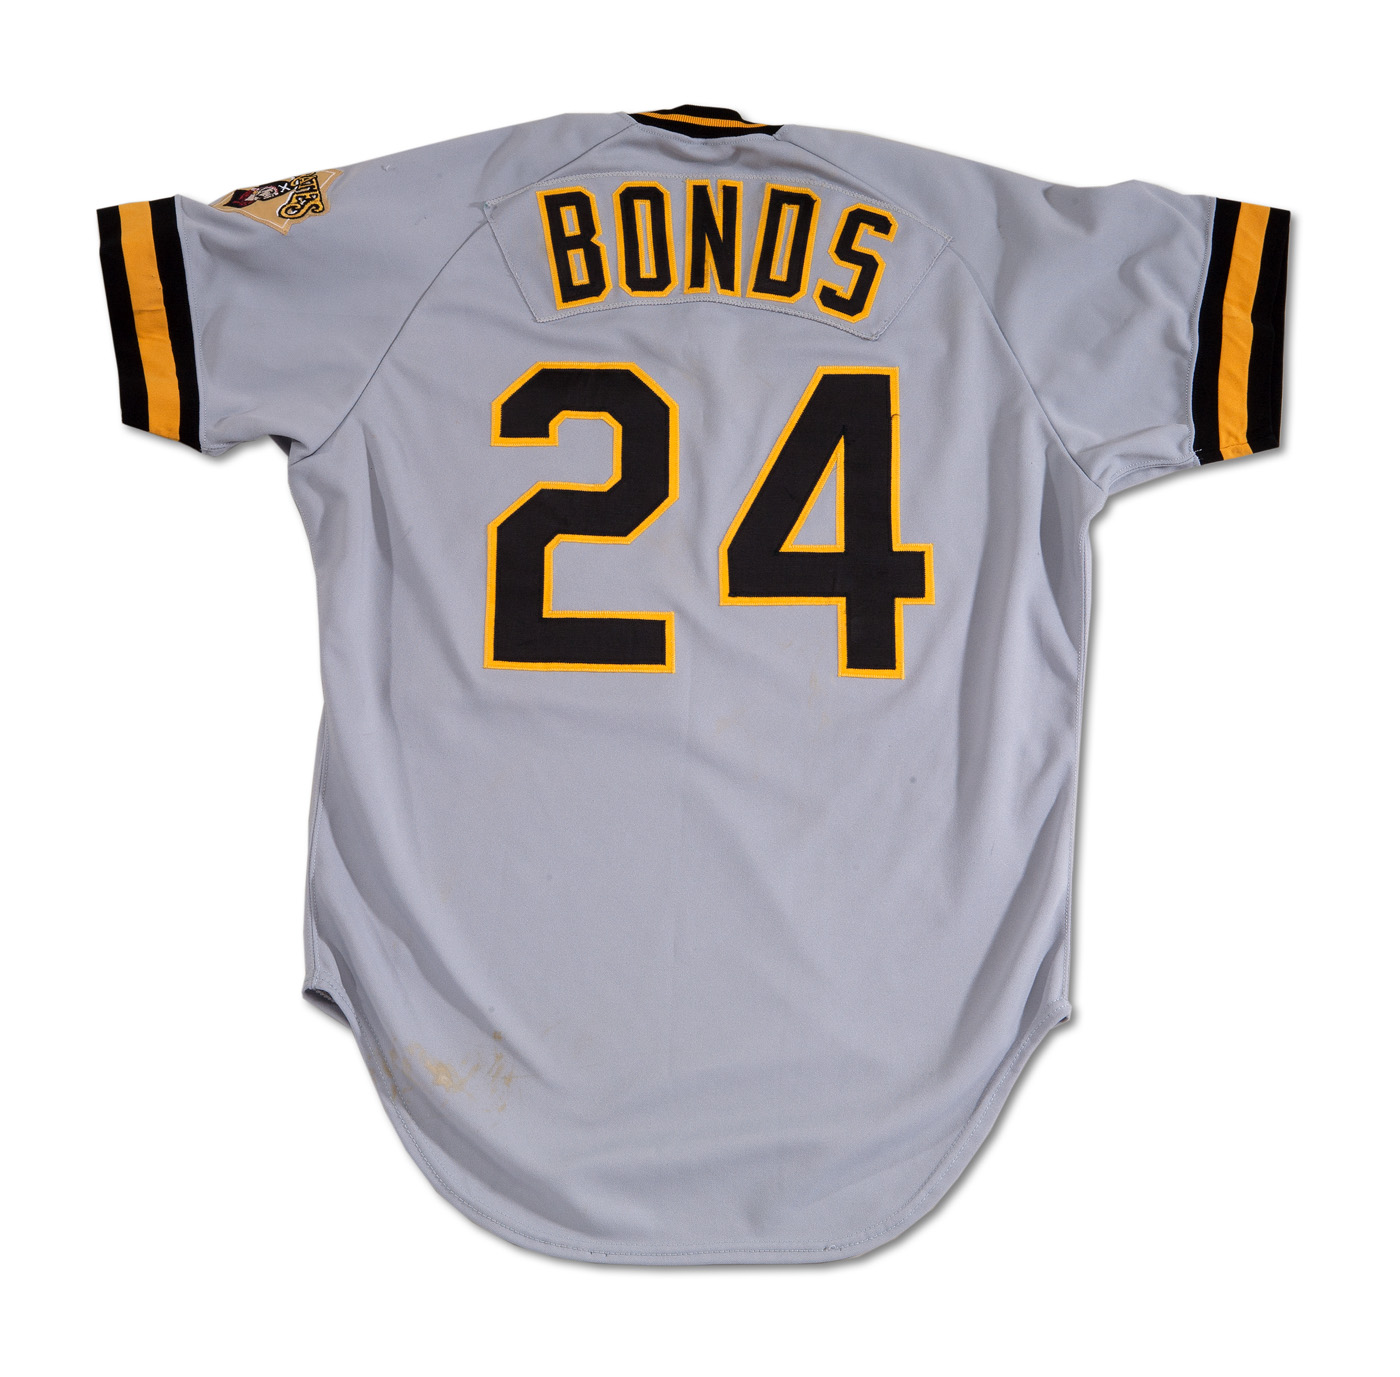 Lot Detail - 1991 Barry Bonds Game Used Pittsburgh Pirates Home Jersey  (Sports Investors Authentication)